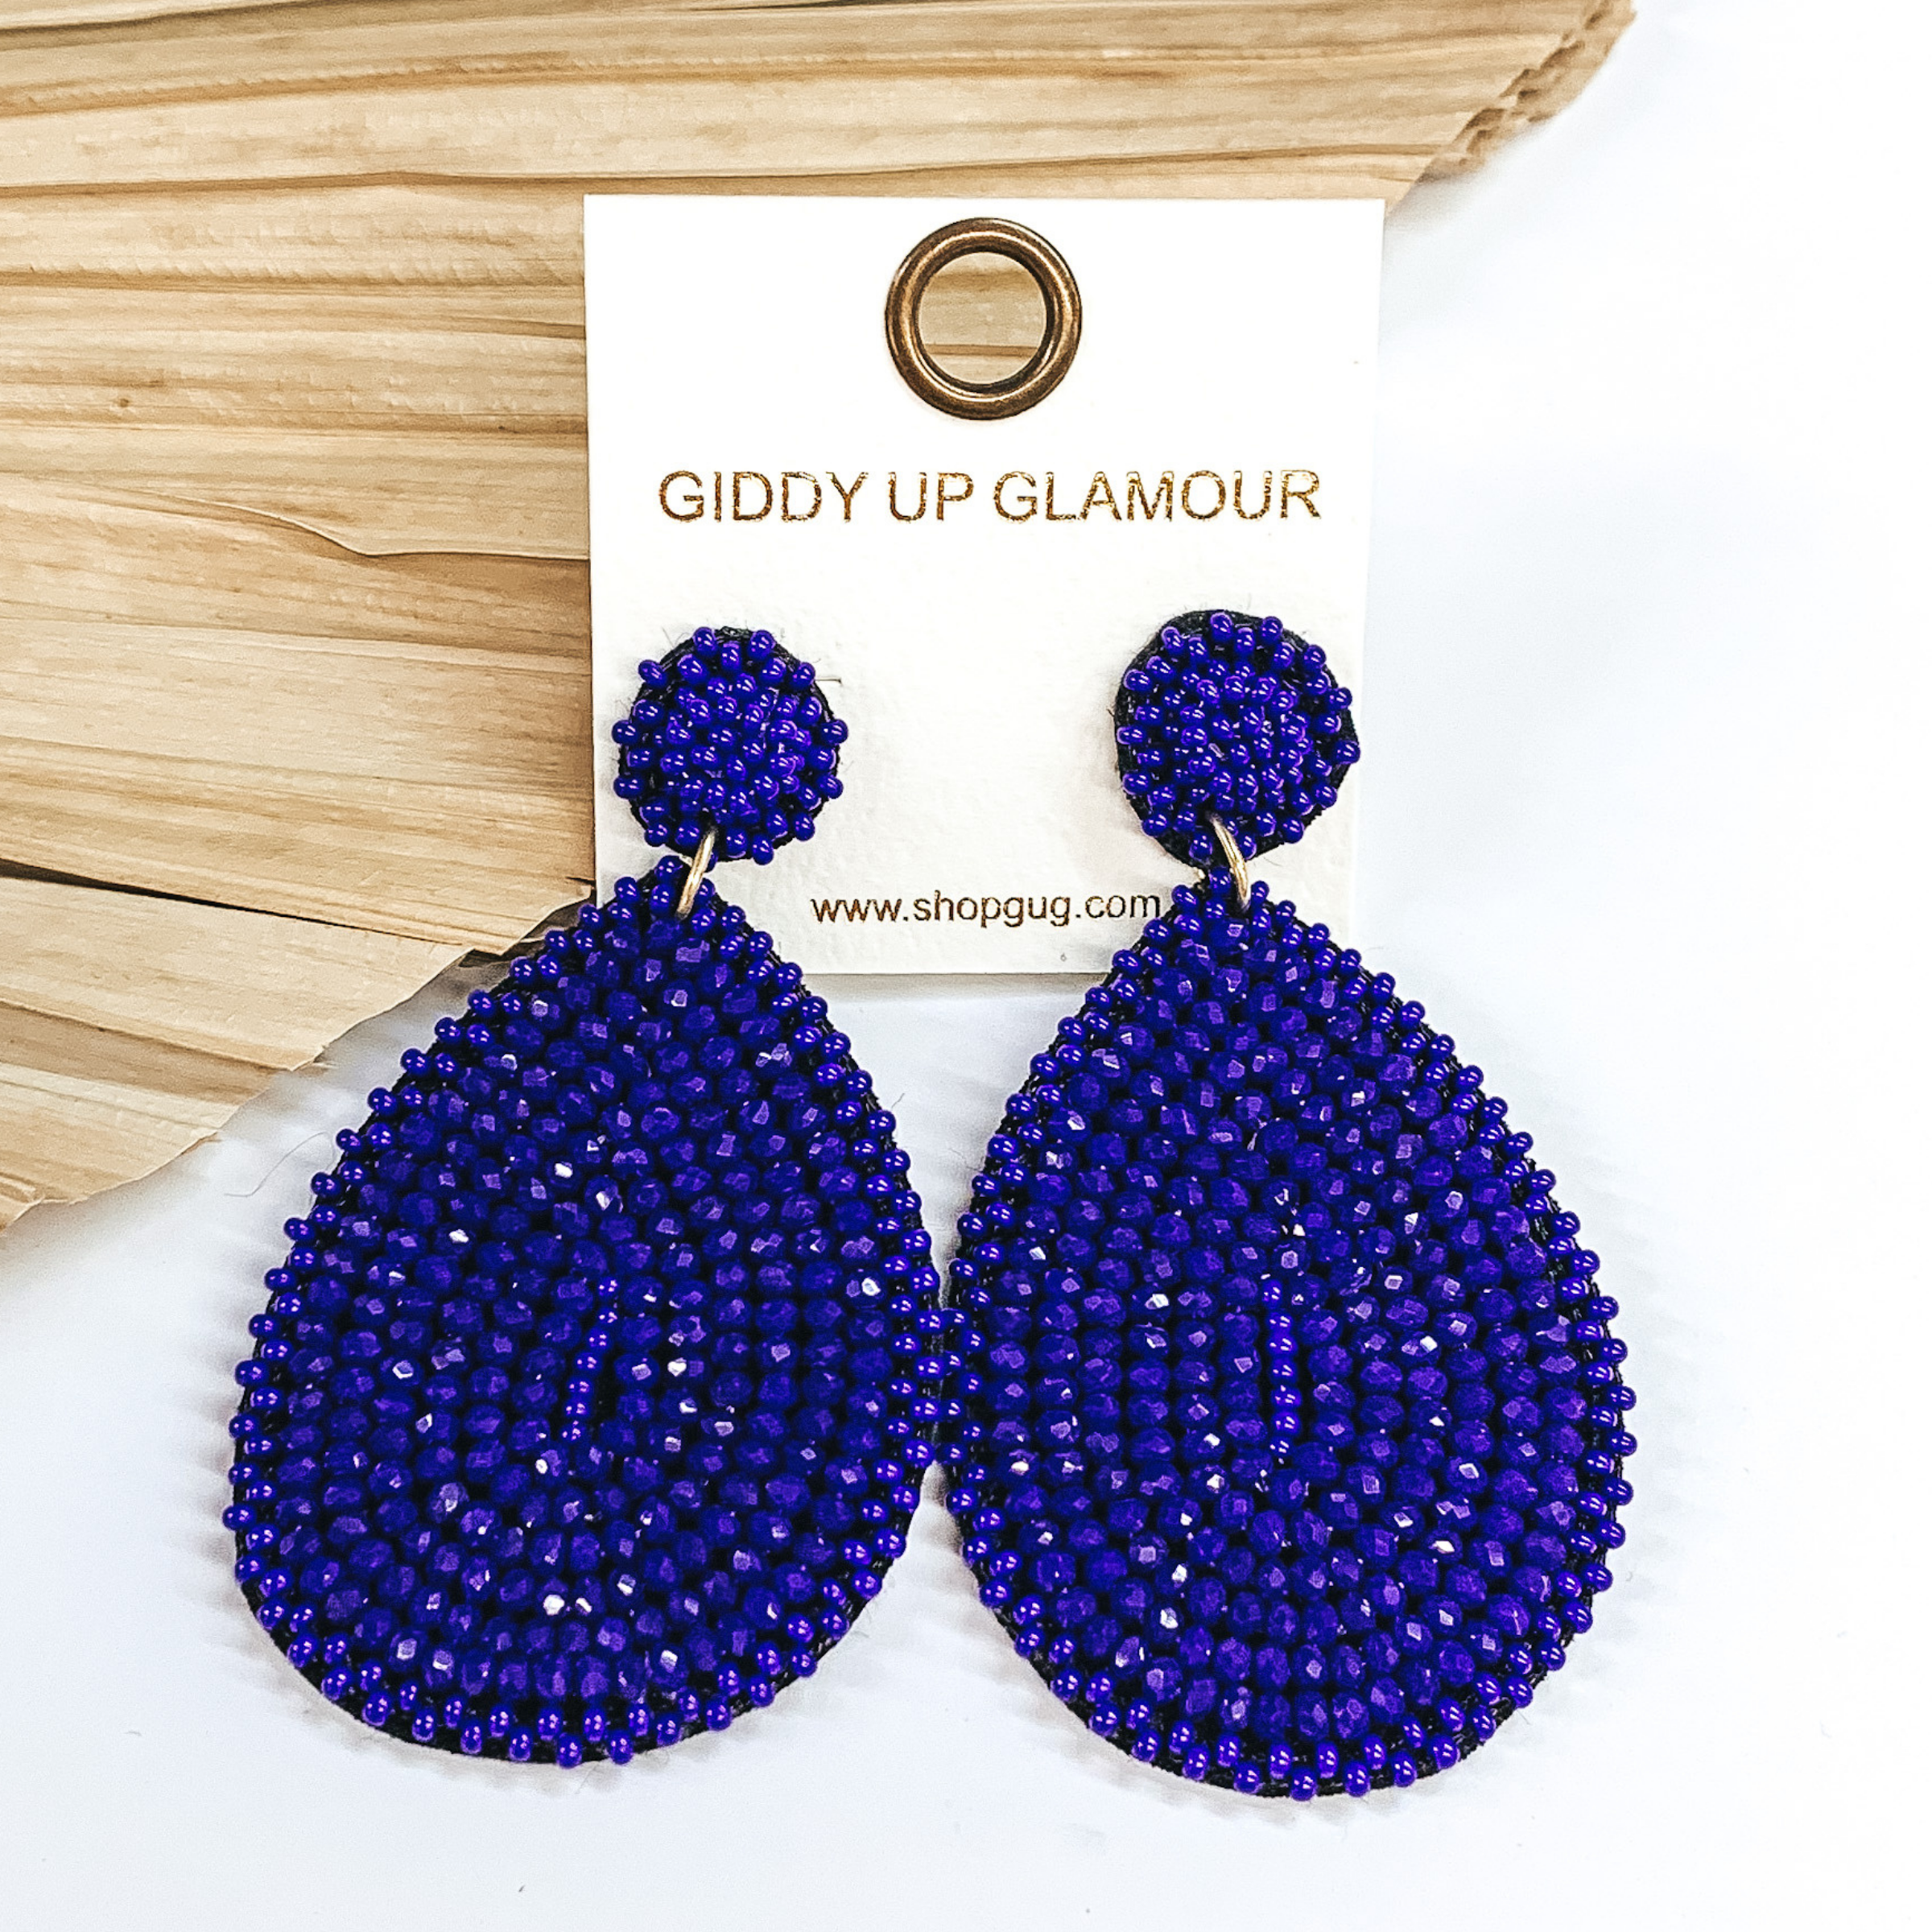 Blue beaded drop earrings in a teardrop shape. These earrings are pictured on a white background with a dried palm leaf in the background.